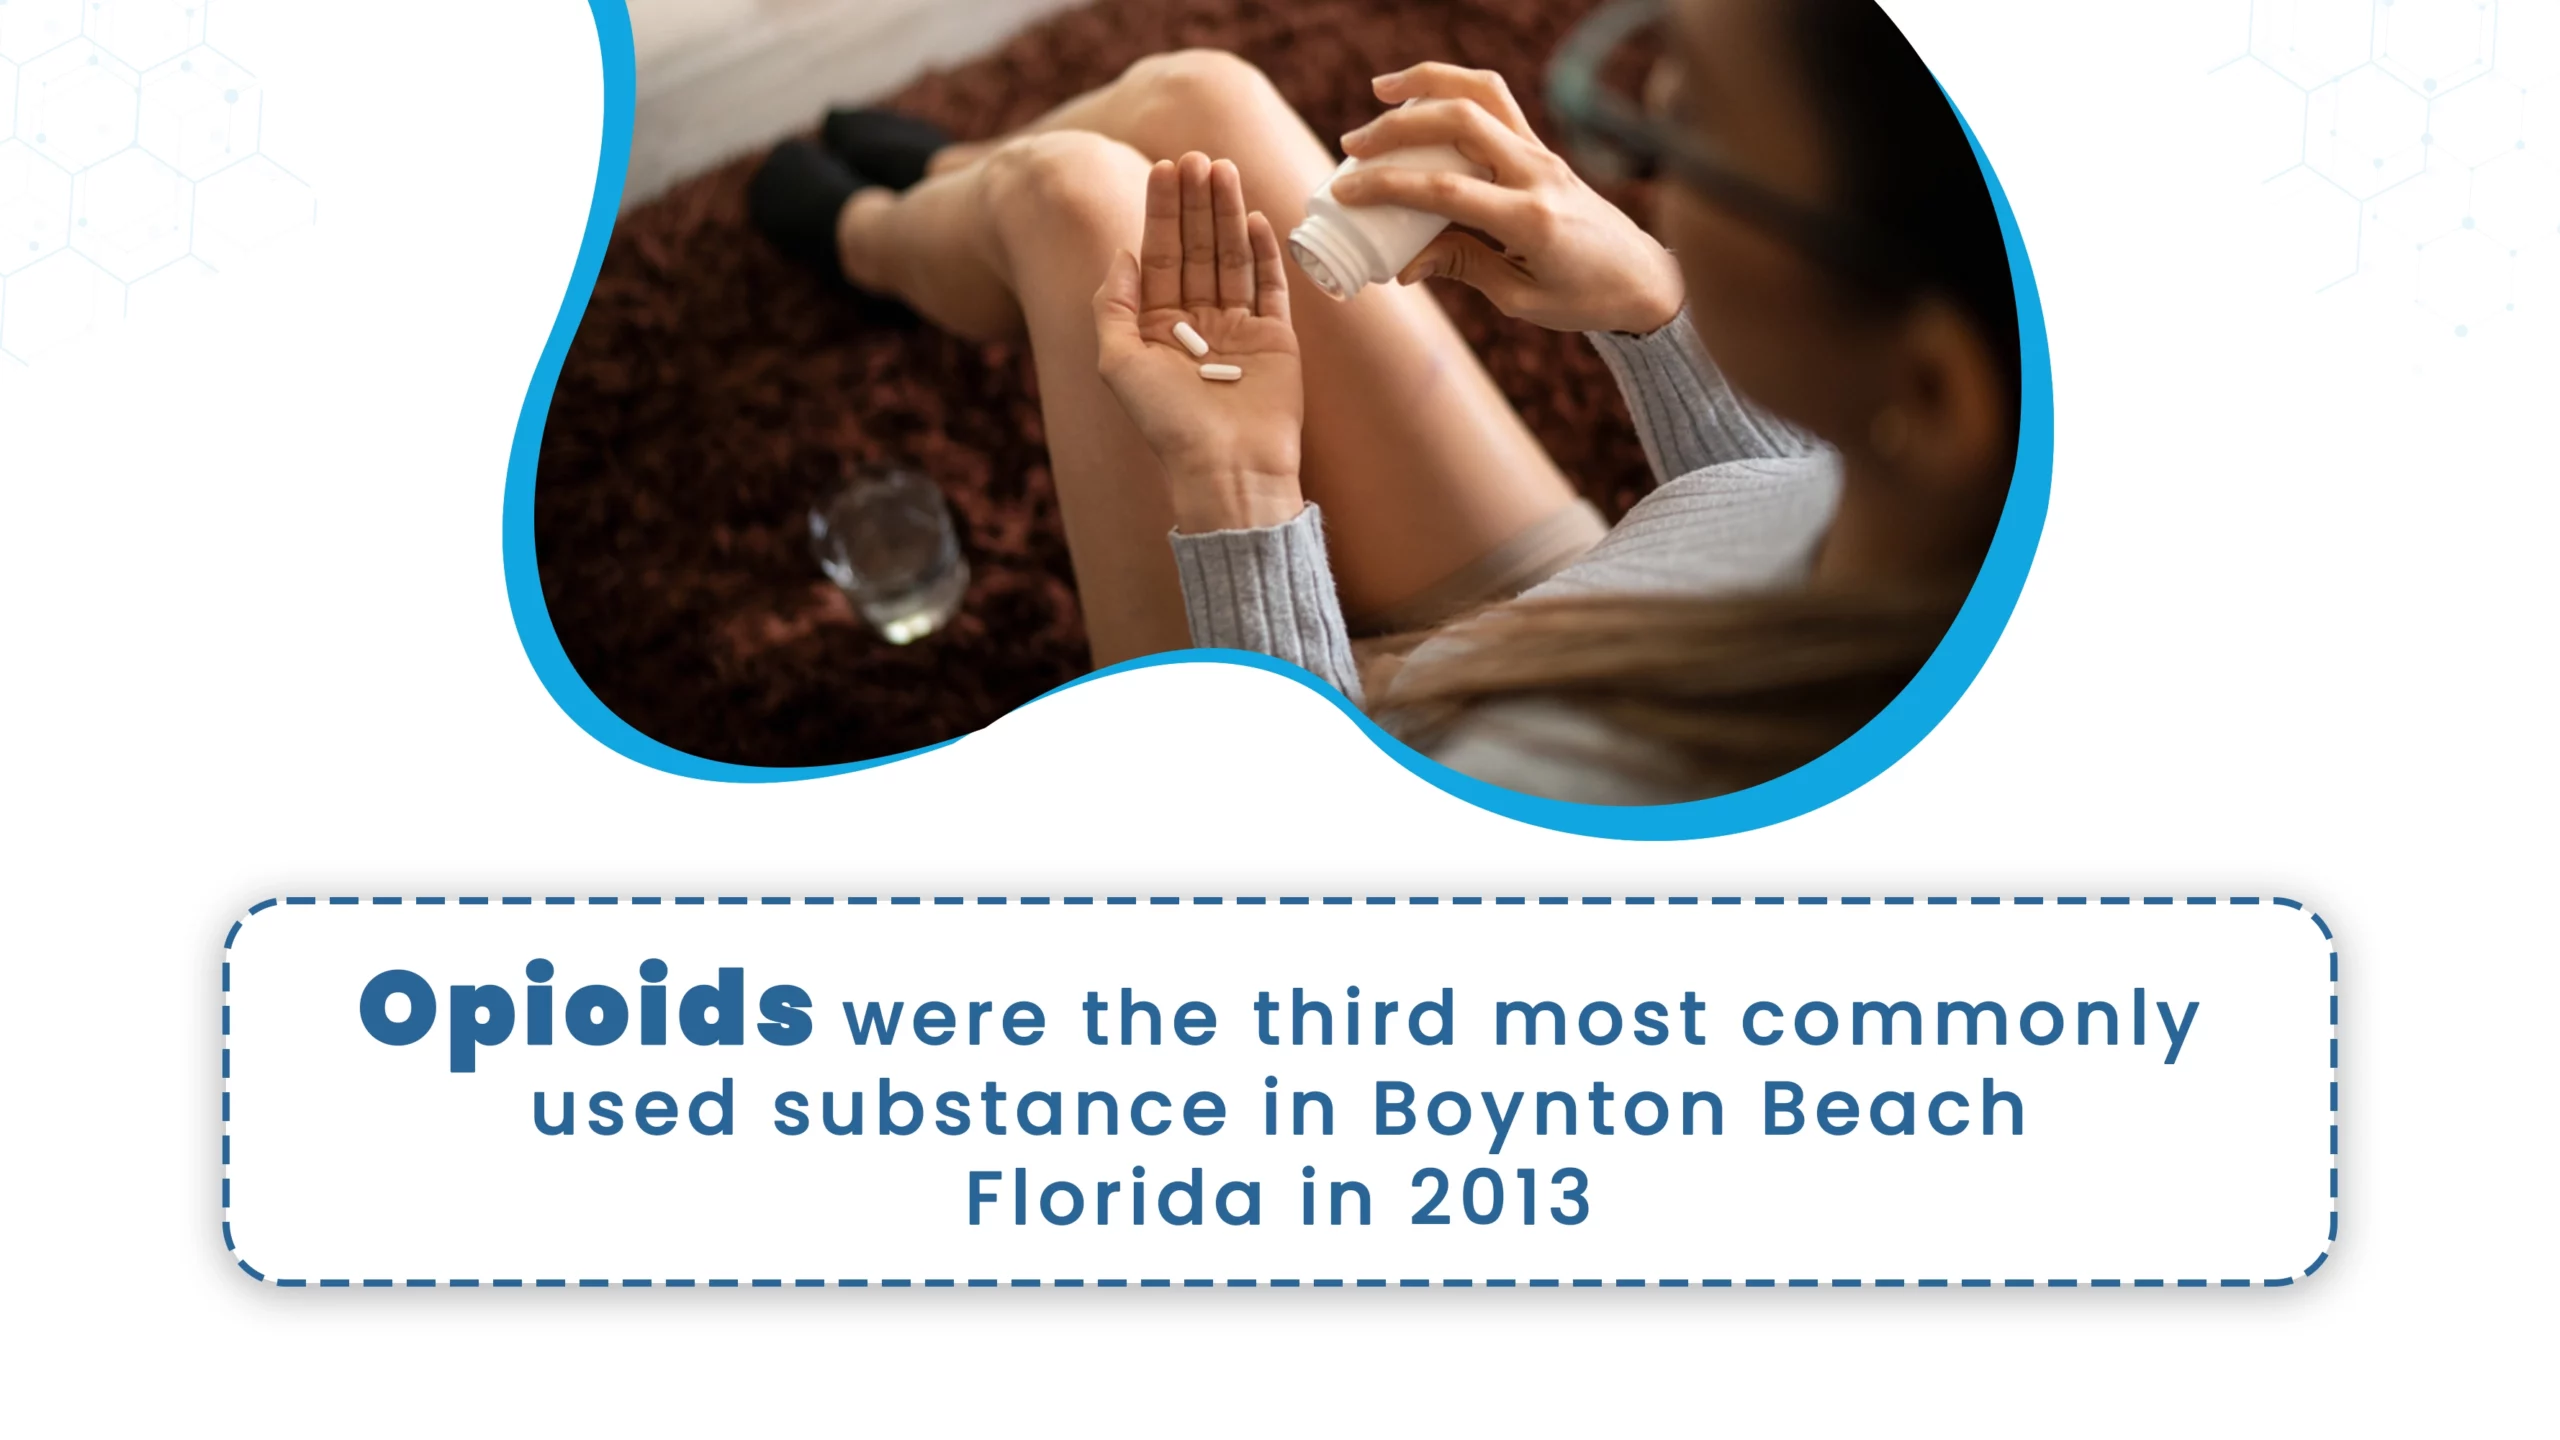 Opioids were the third most commonly used substance in boynton beach florida in 2013